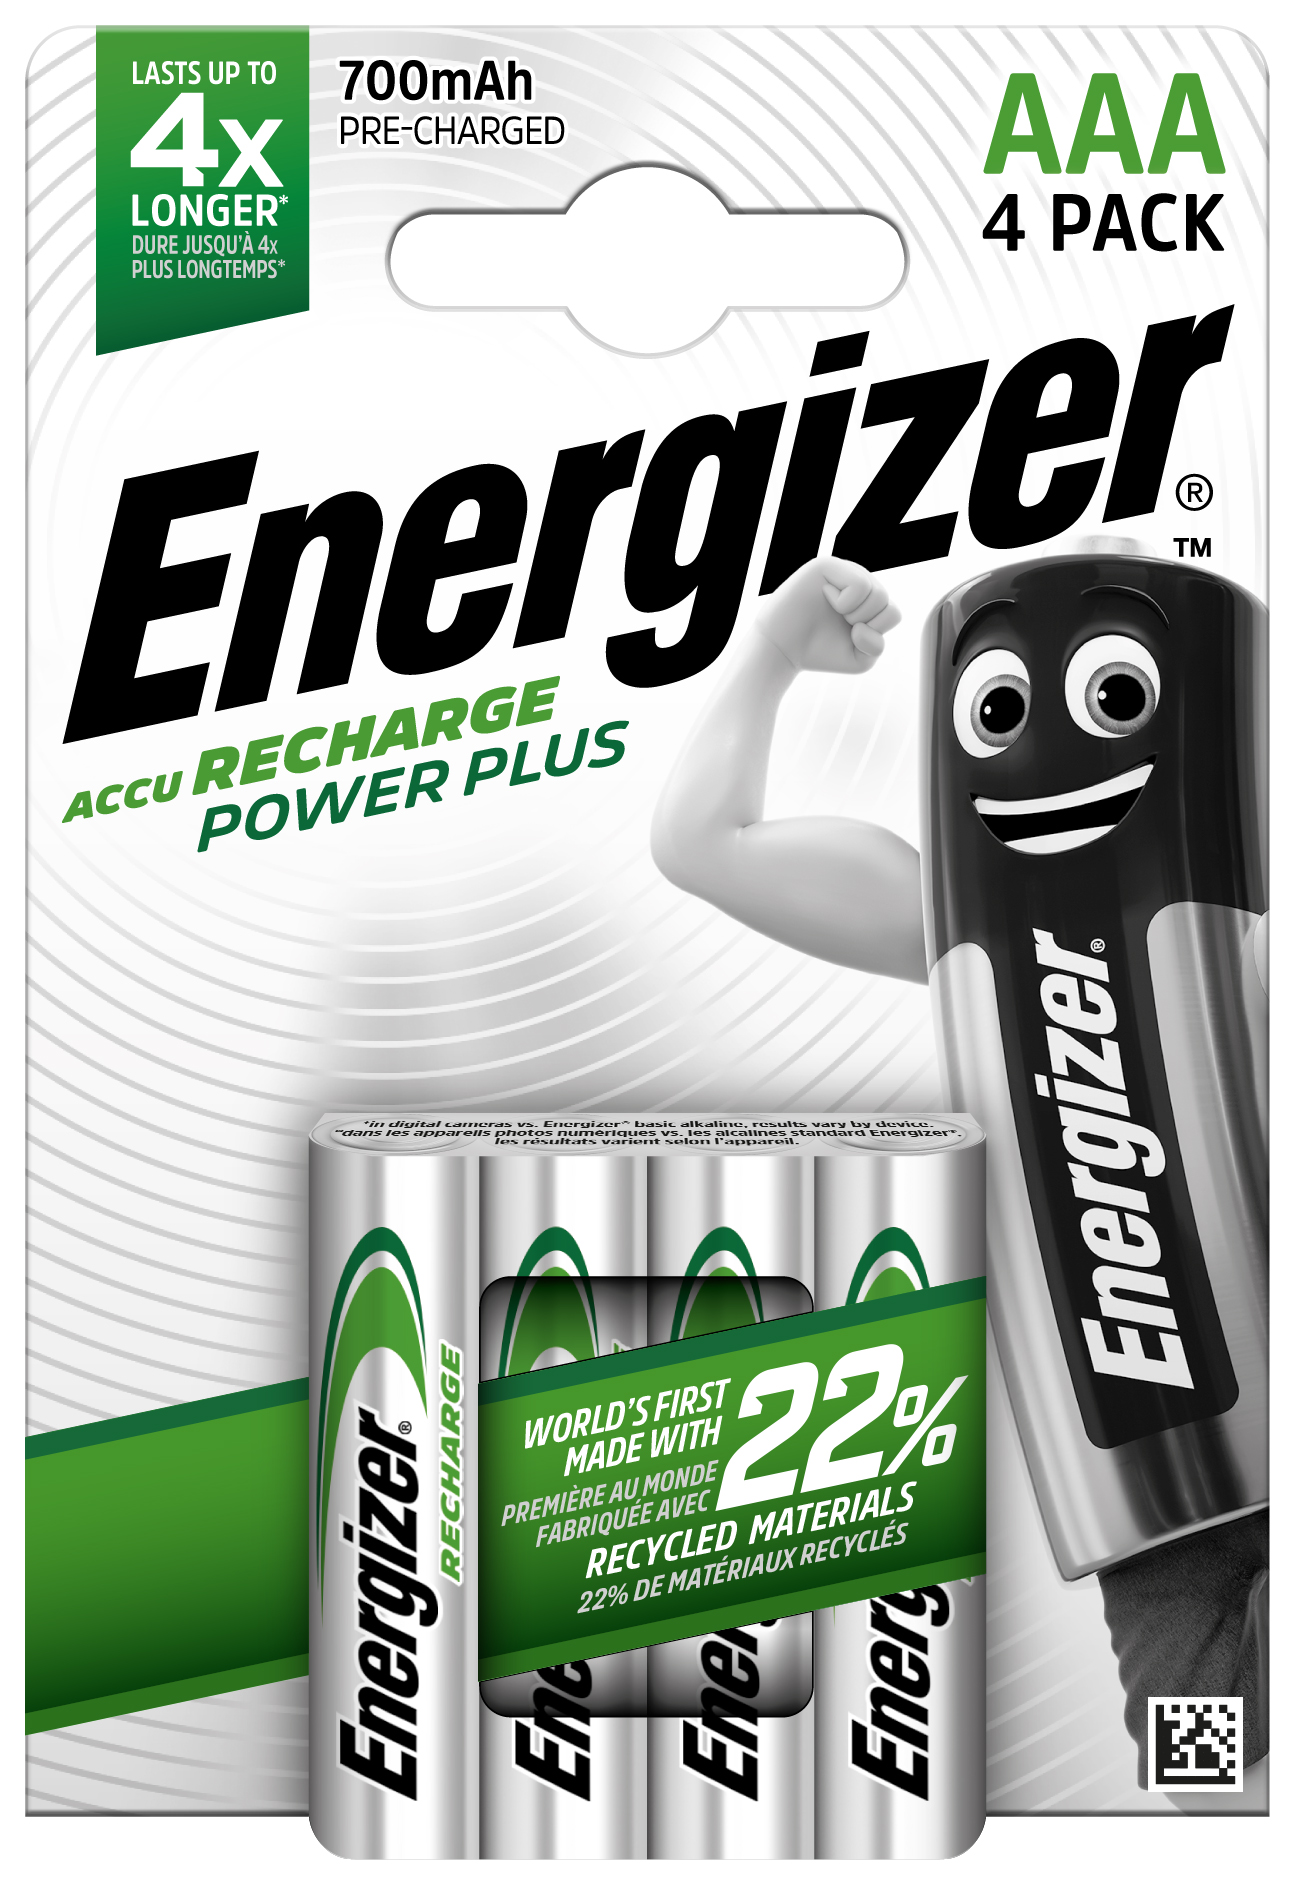 Energizer Power Plus BP4 AAA Rechargeable Batteries - Pack of 4